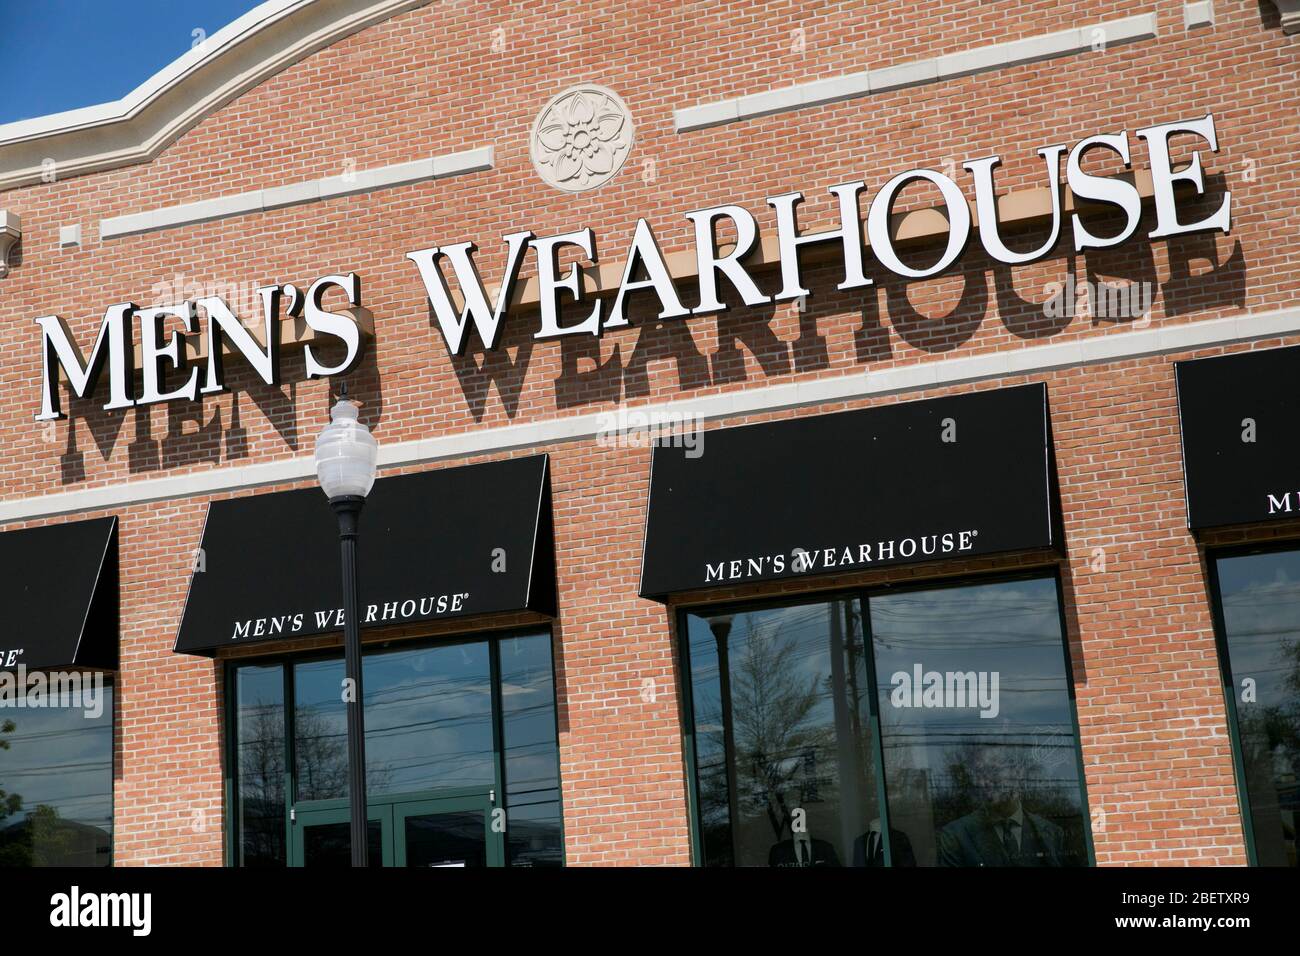 A logo sign outside of a Men's Wearhouse retail store location in Cherry Hill, New Jersey on April 11, 2020. Stock Photo